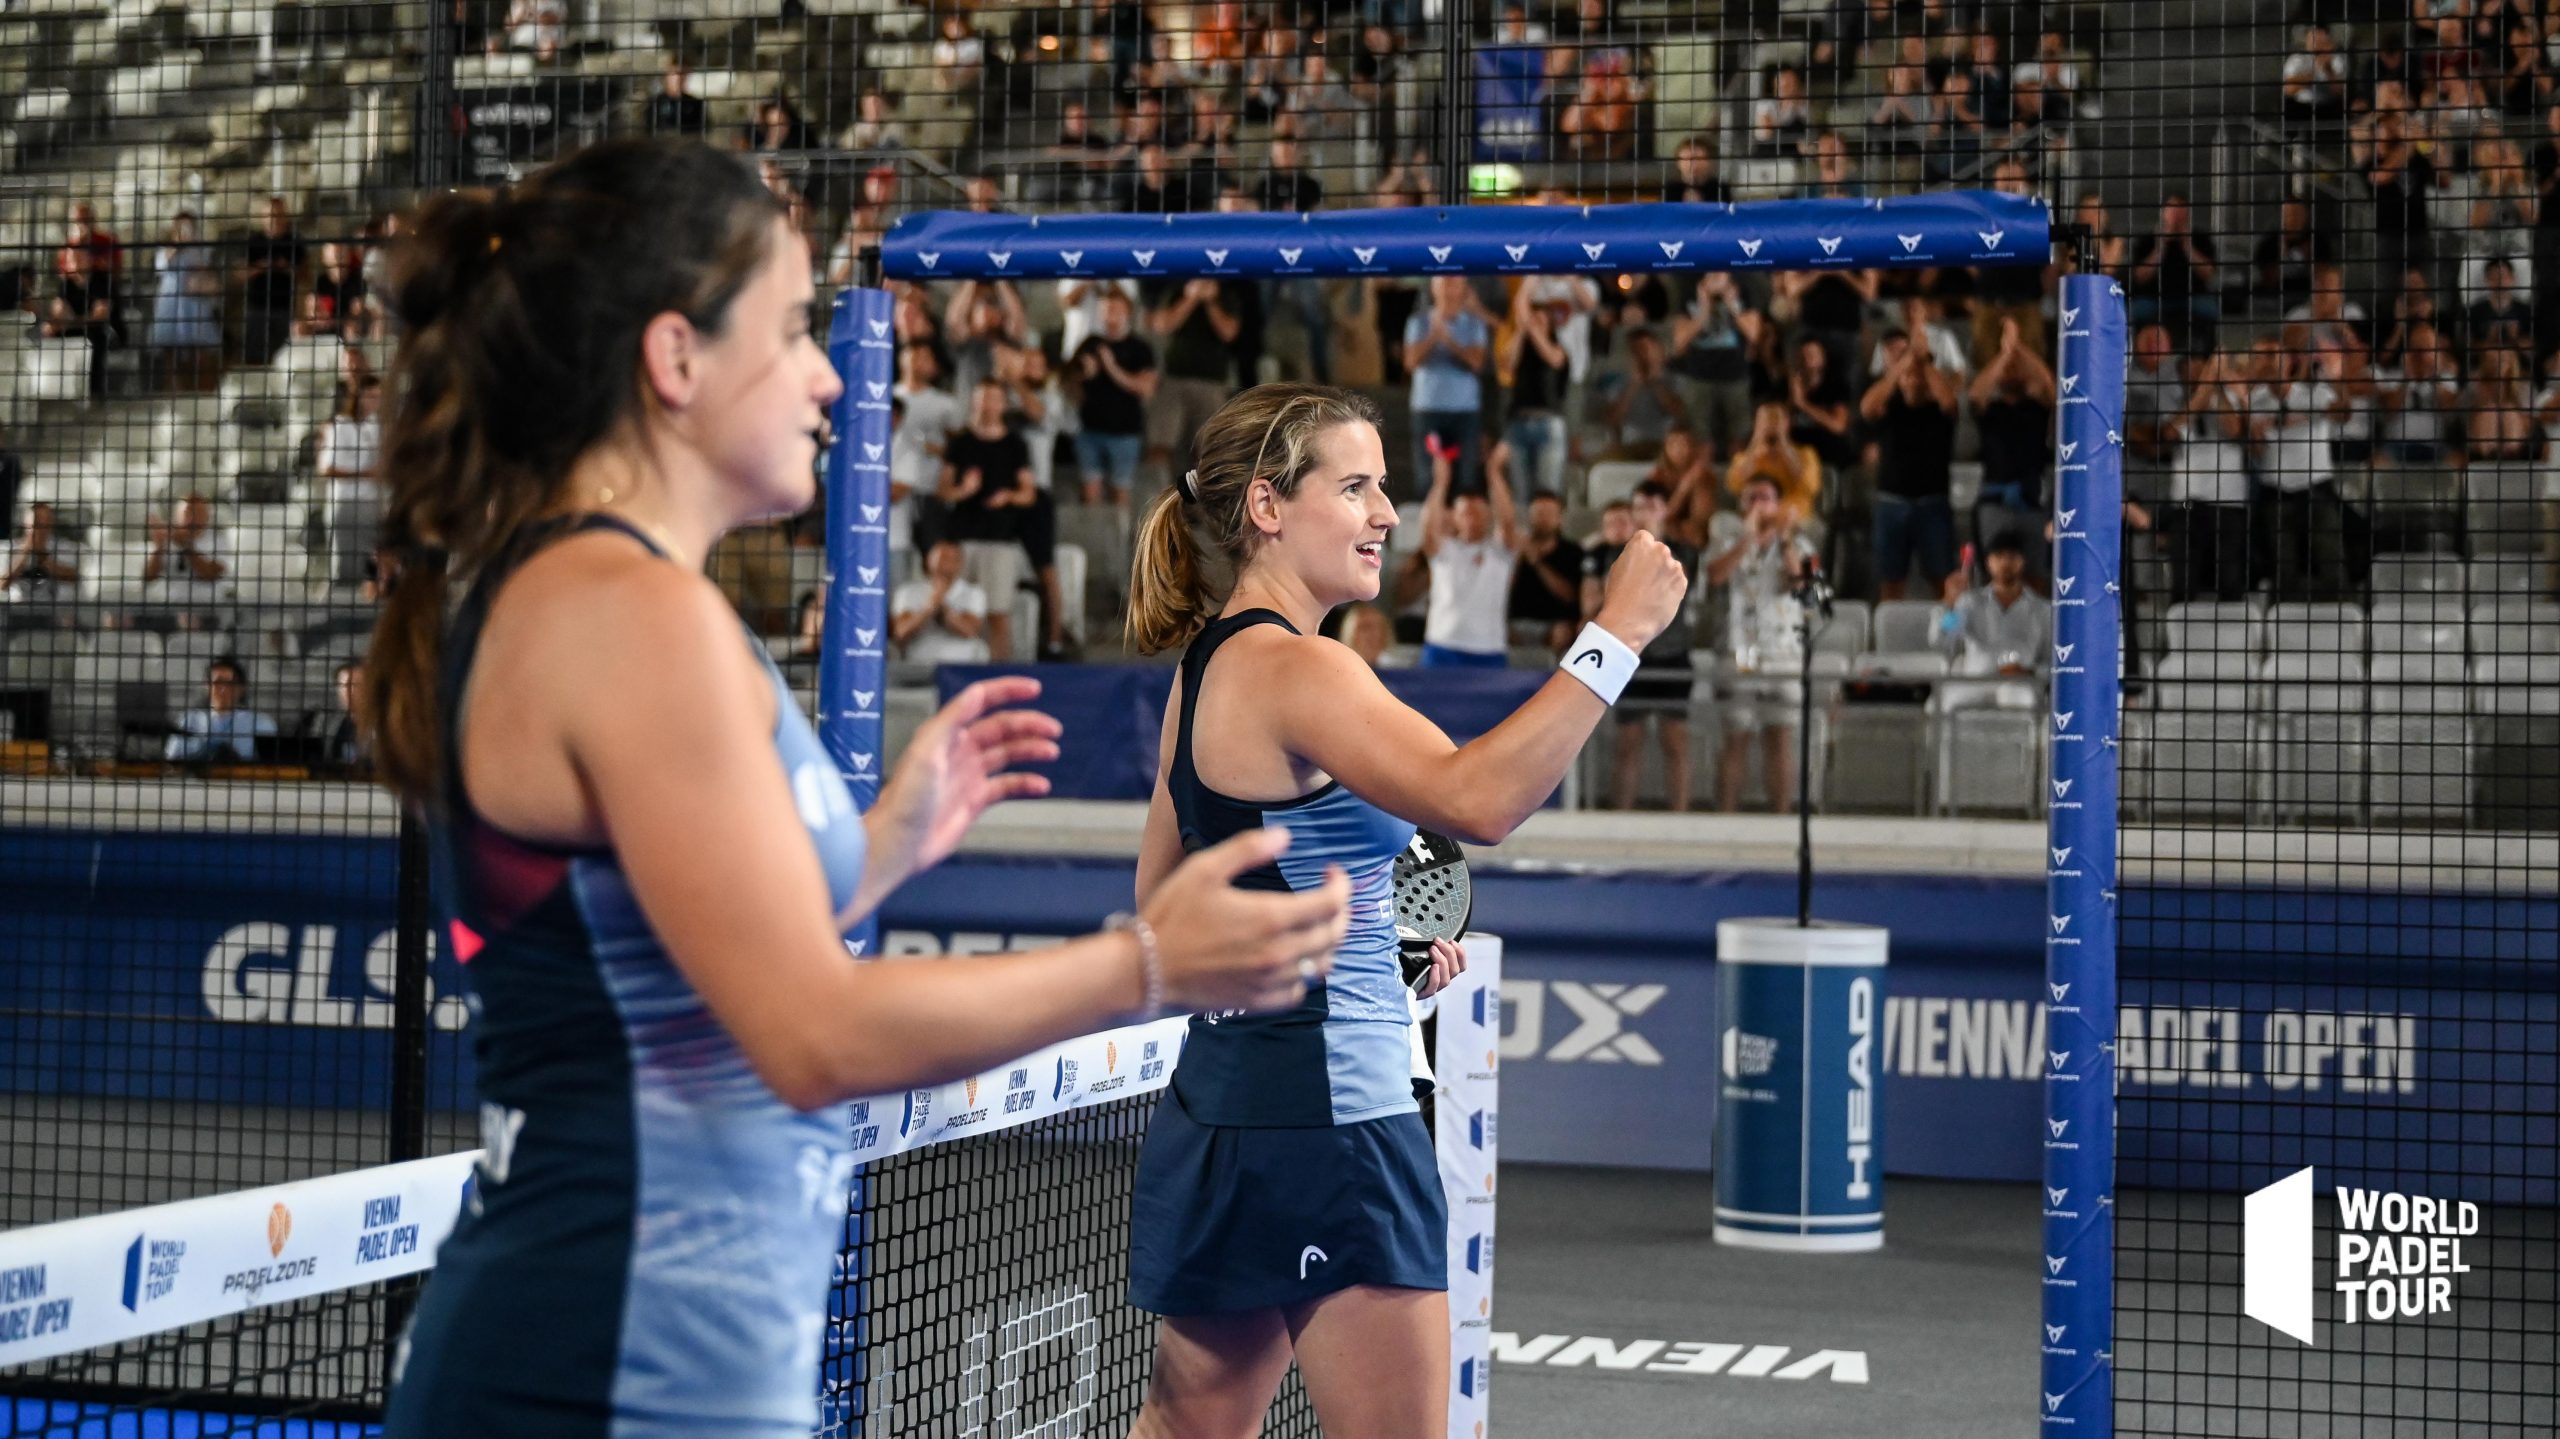 Sánchez and Josemaría come back in three-hour classic to make Vienna Padel Open 2022 final